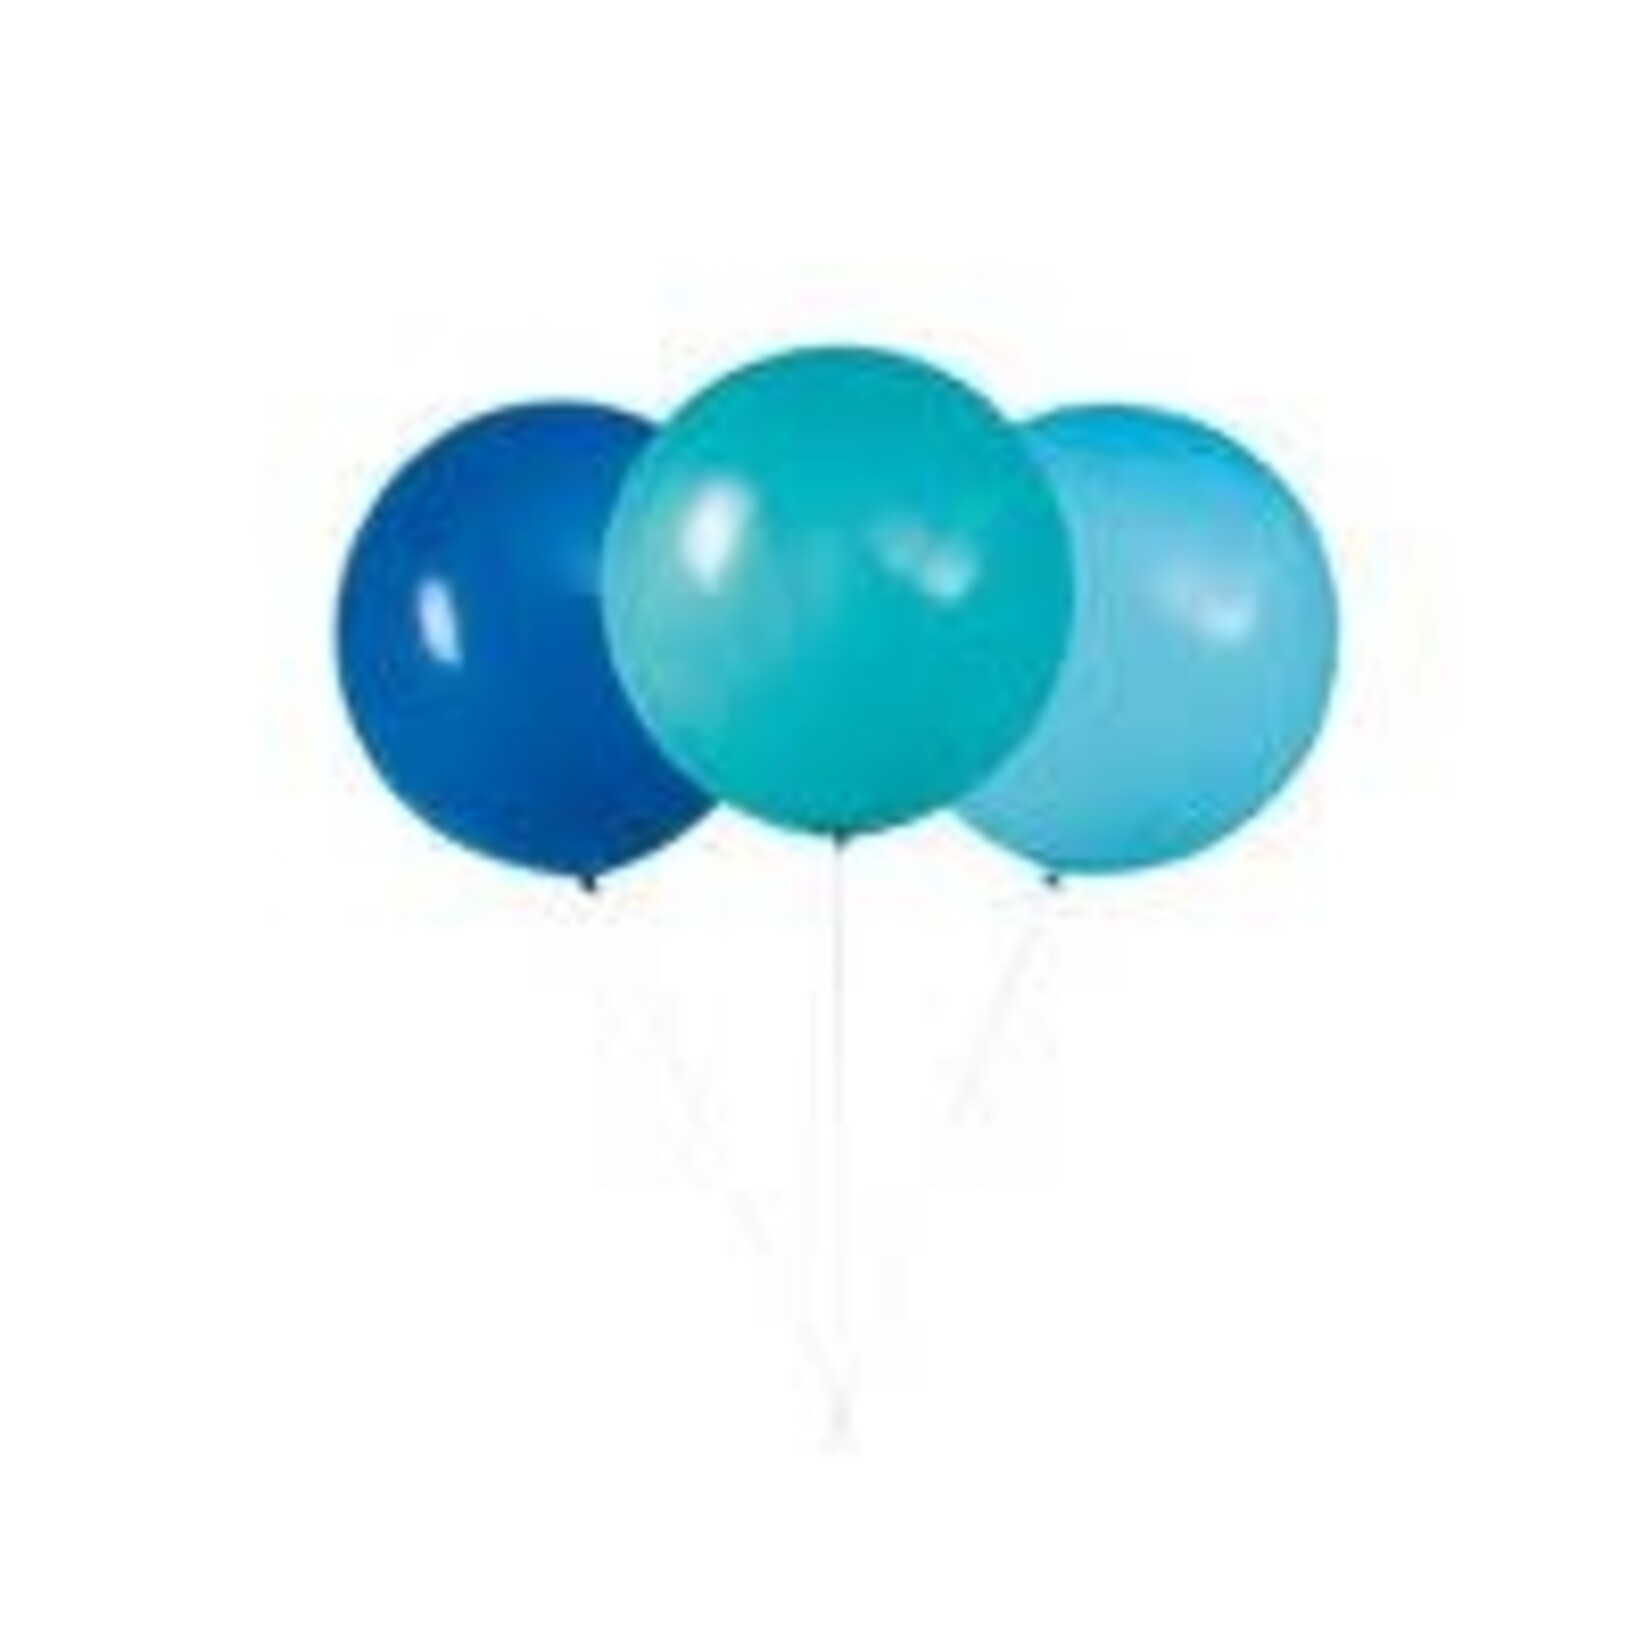 unique 24" Blue, Teal & Baby Blue Latex Balloons - 3ct. (Helium Not Included)